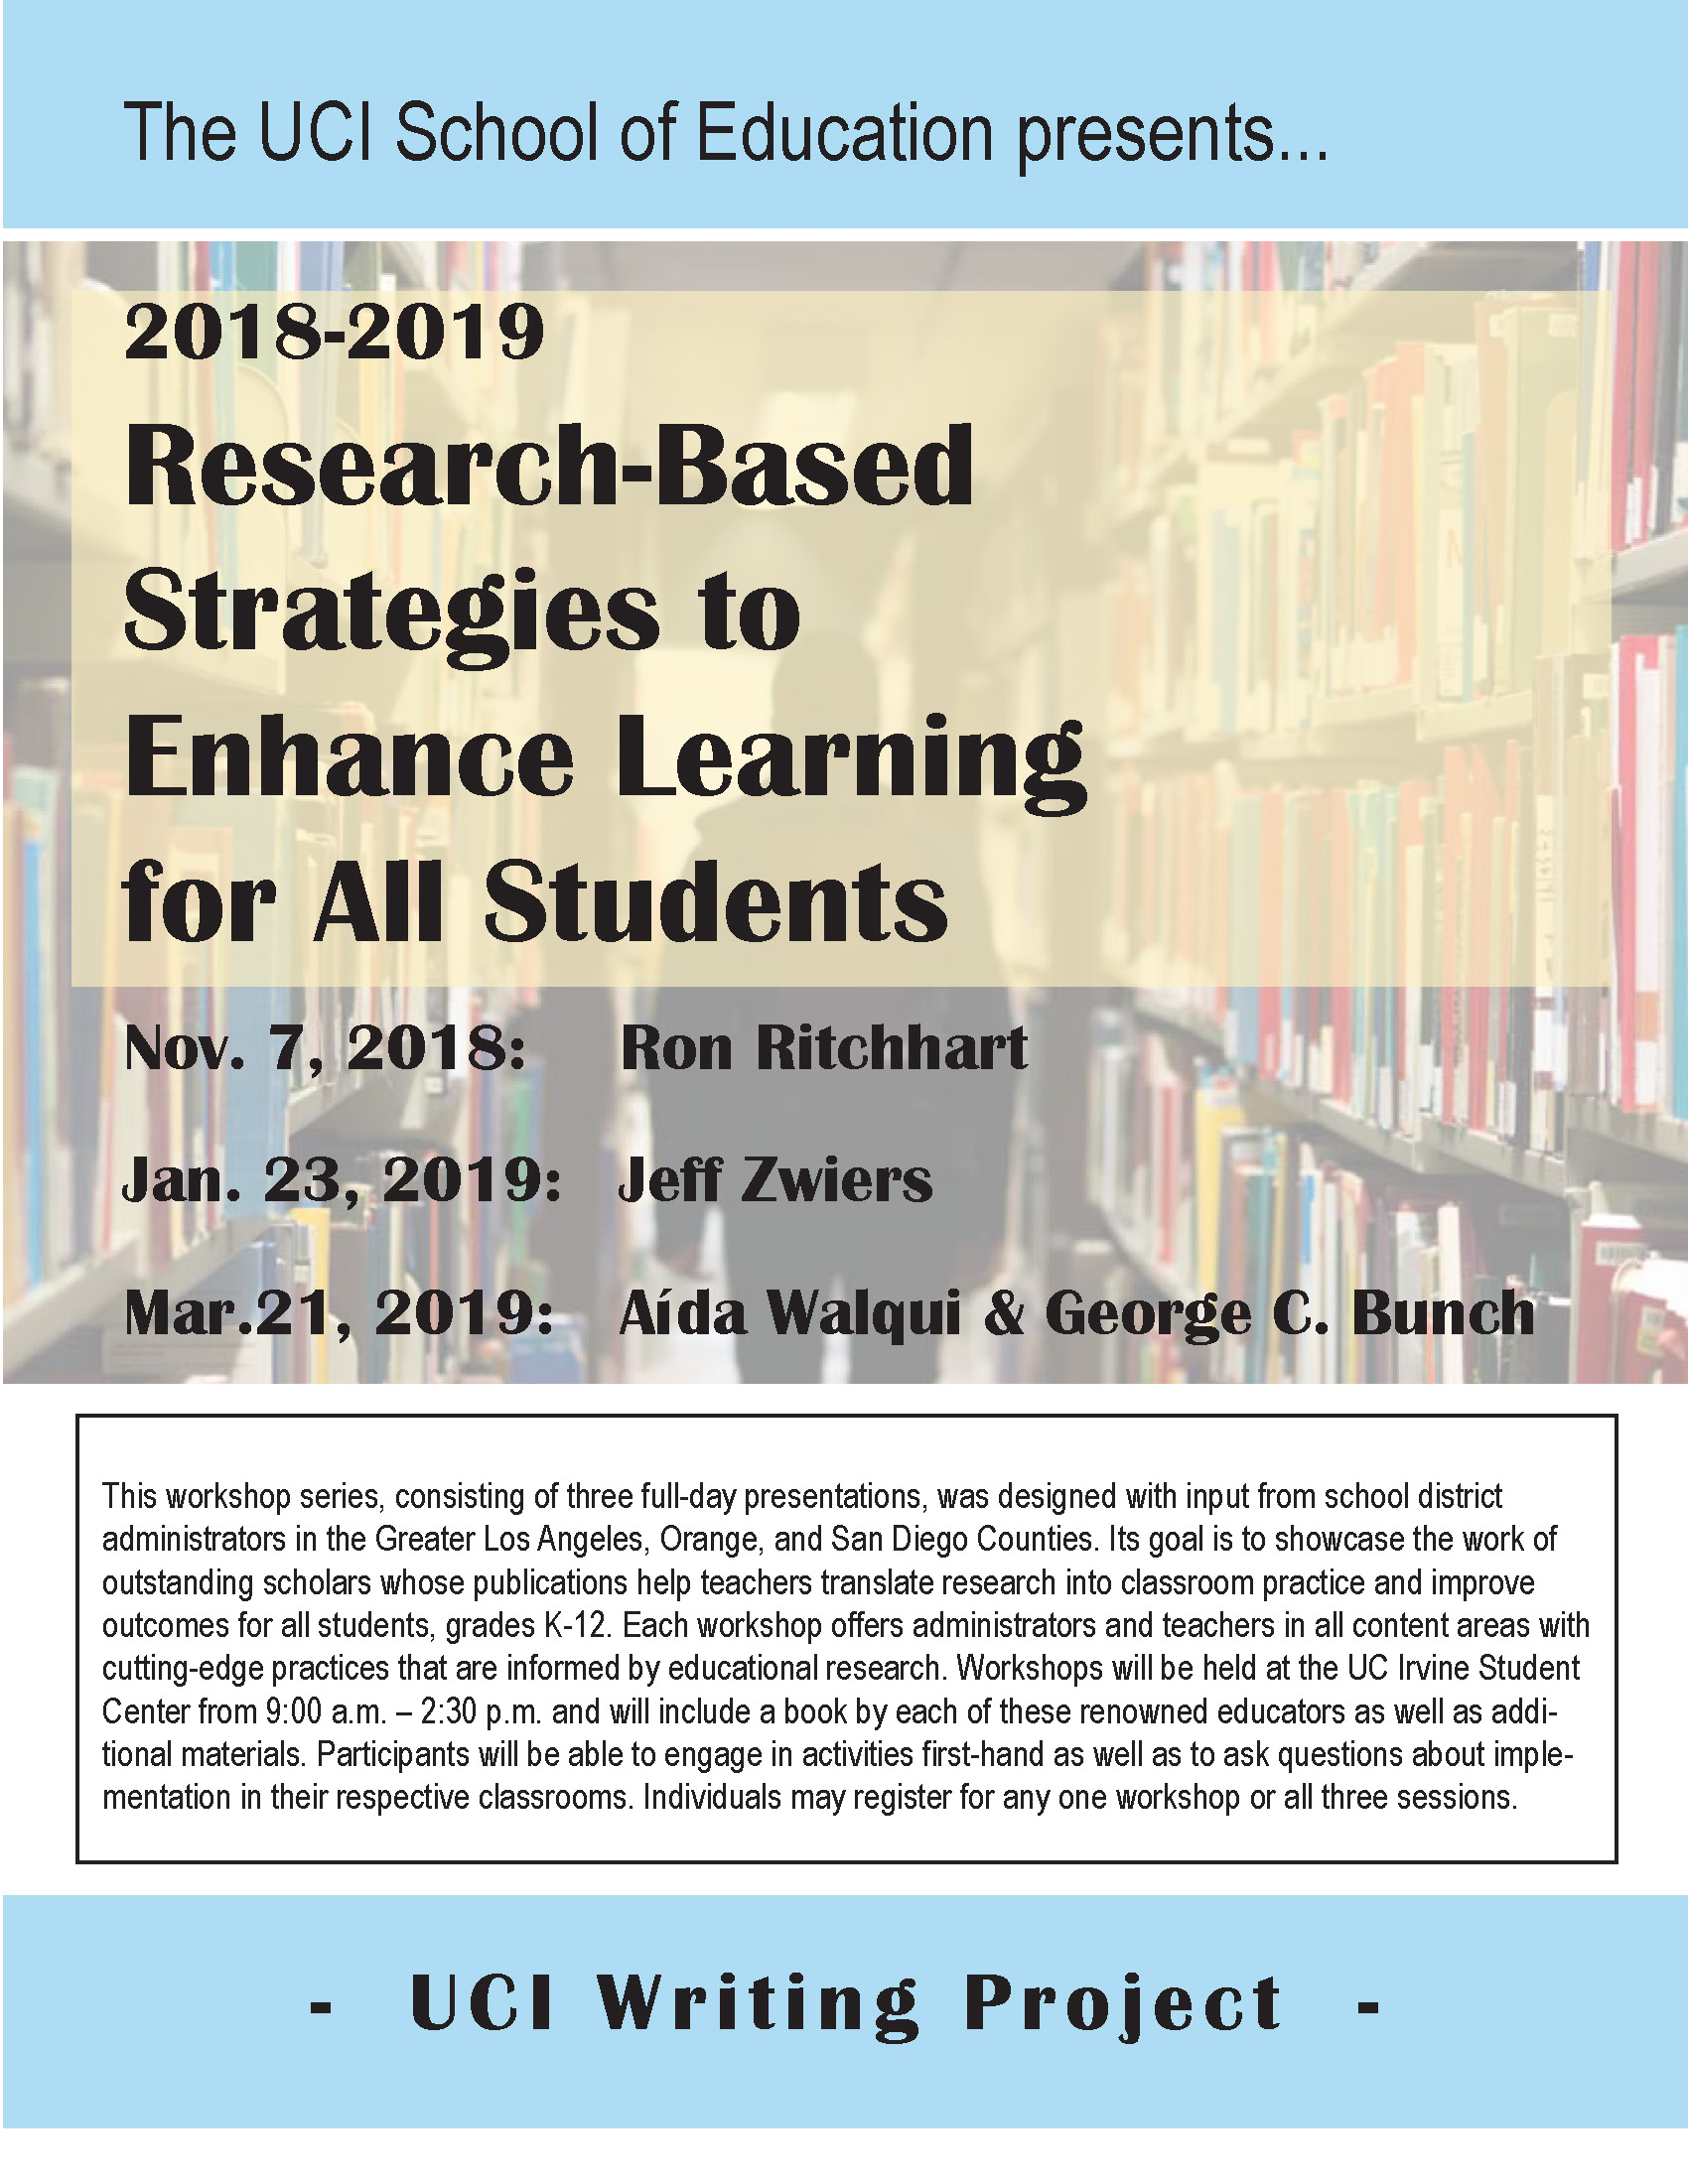 2018-2019 Researched-Based Strategies to Enhance Learning for All Students